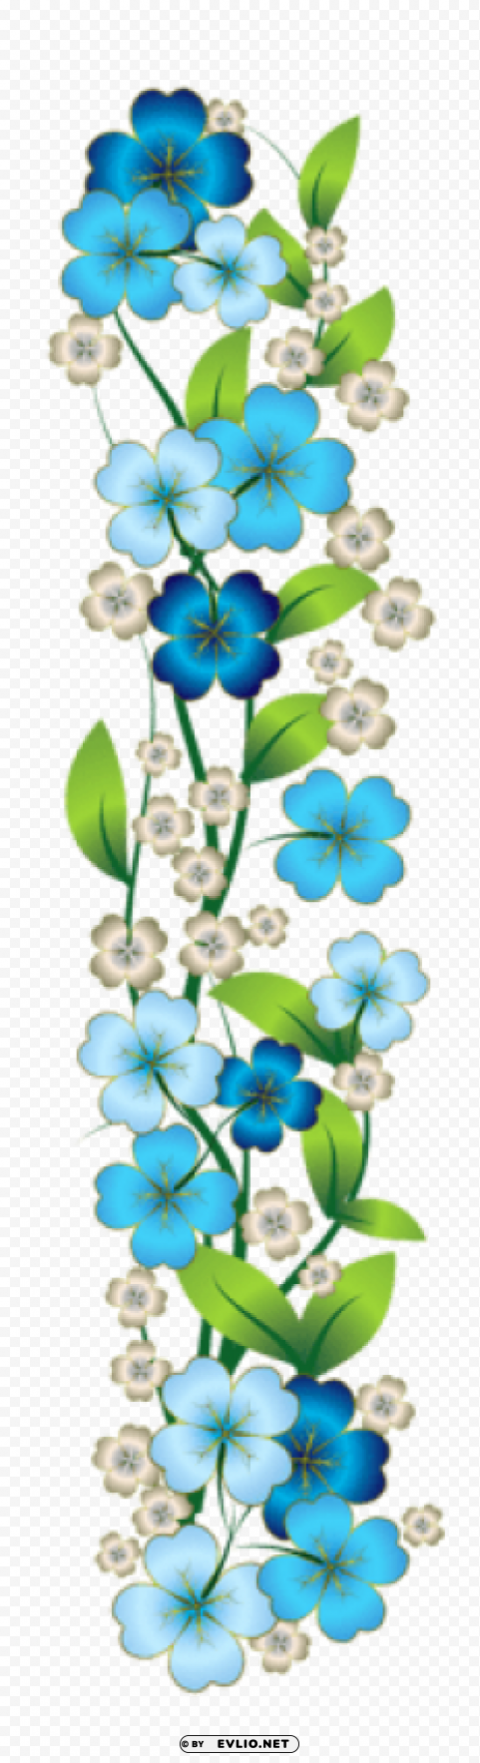 blue flower decor Transparent PNG Isolated Graphic Detail clipart png photo - 7700a2ca